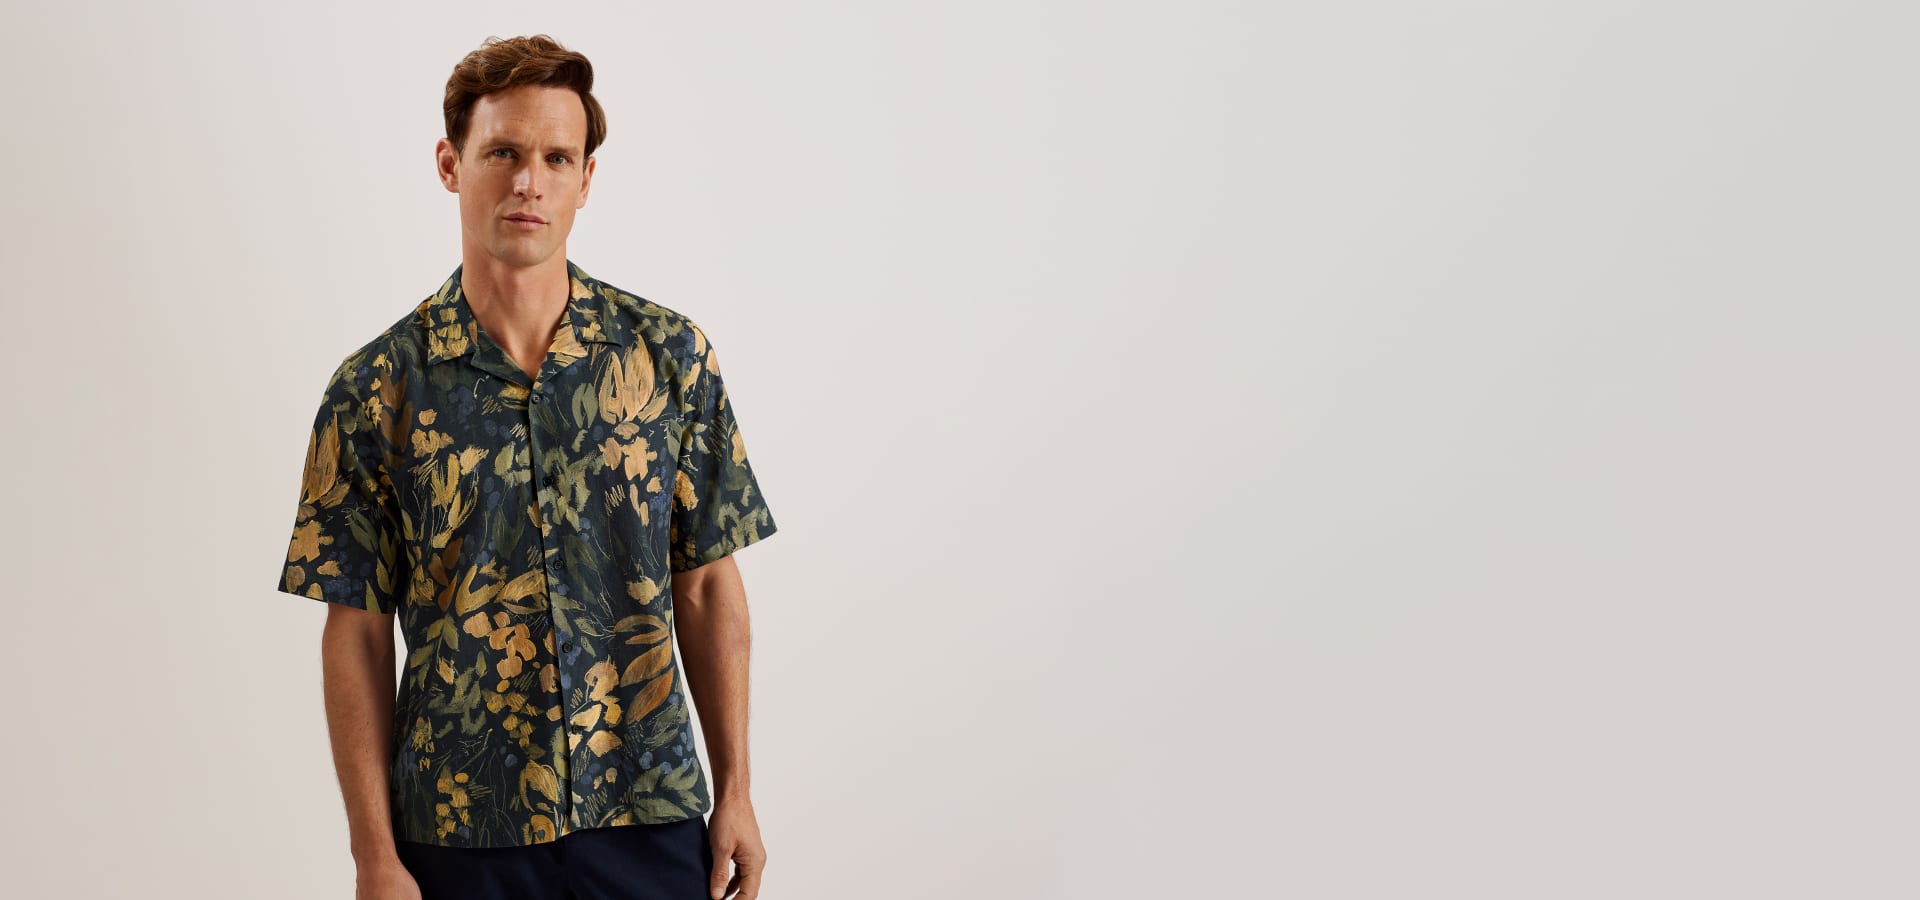 Man in a floral short sleeve shirt